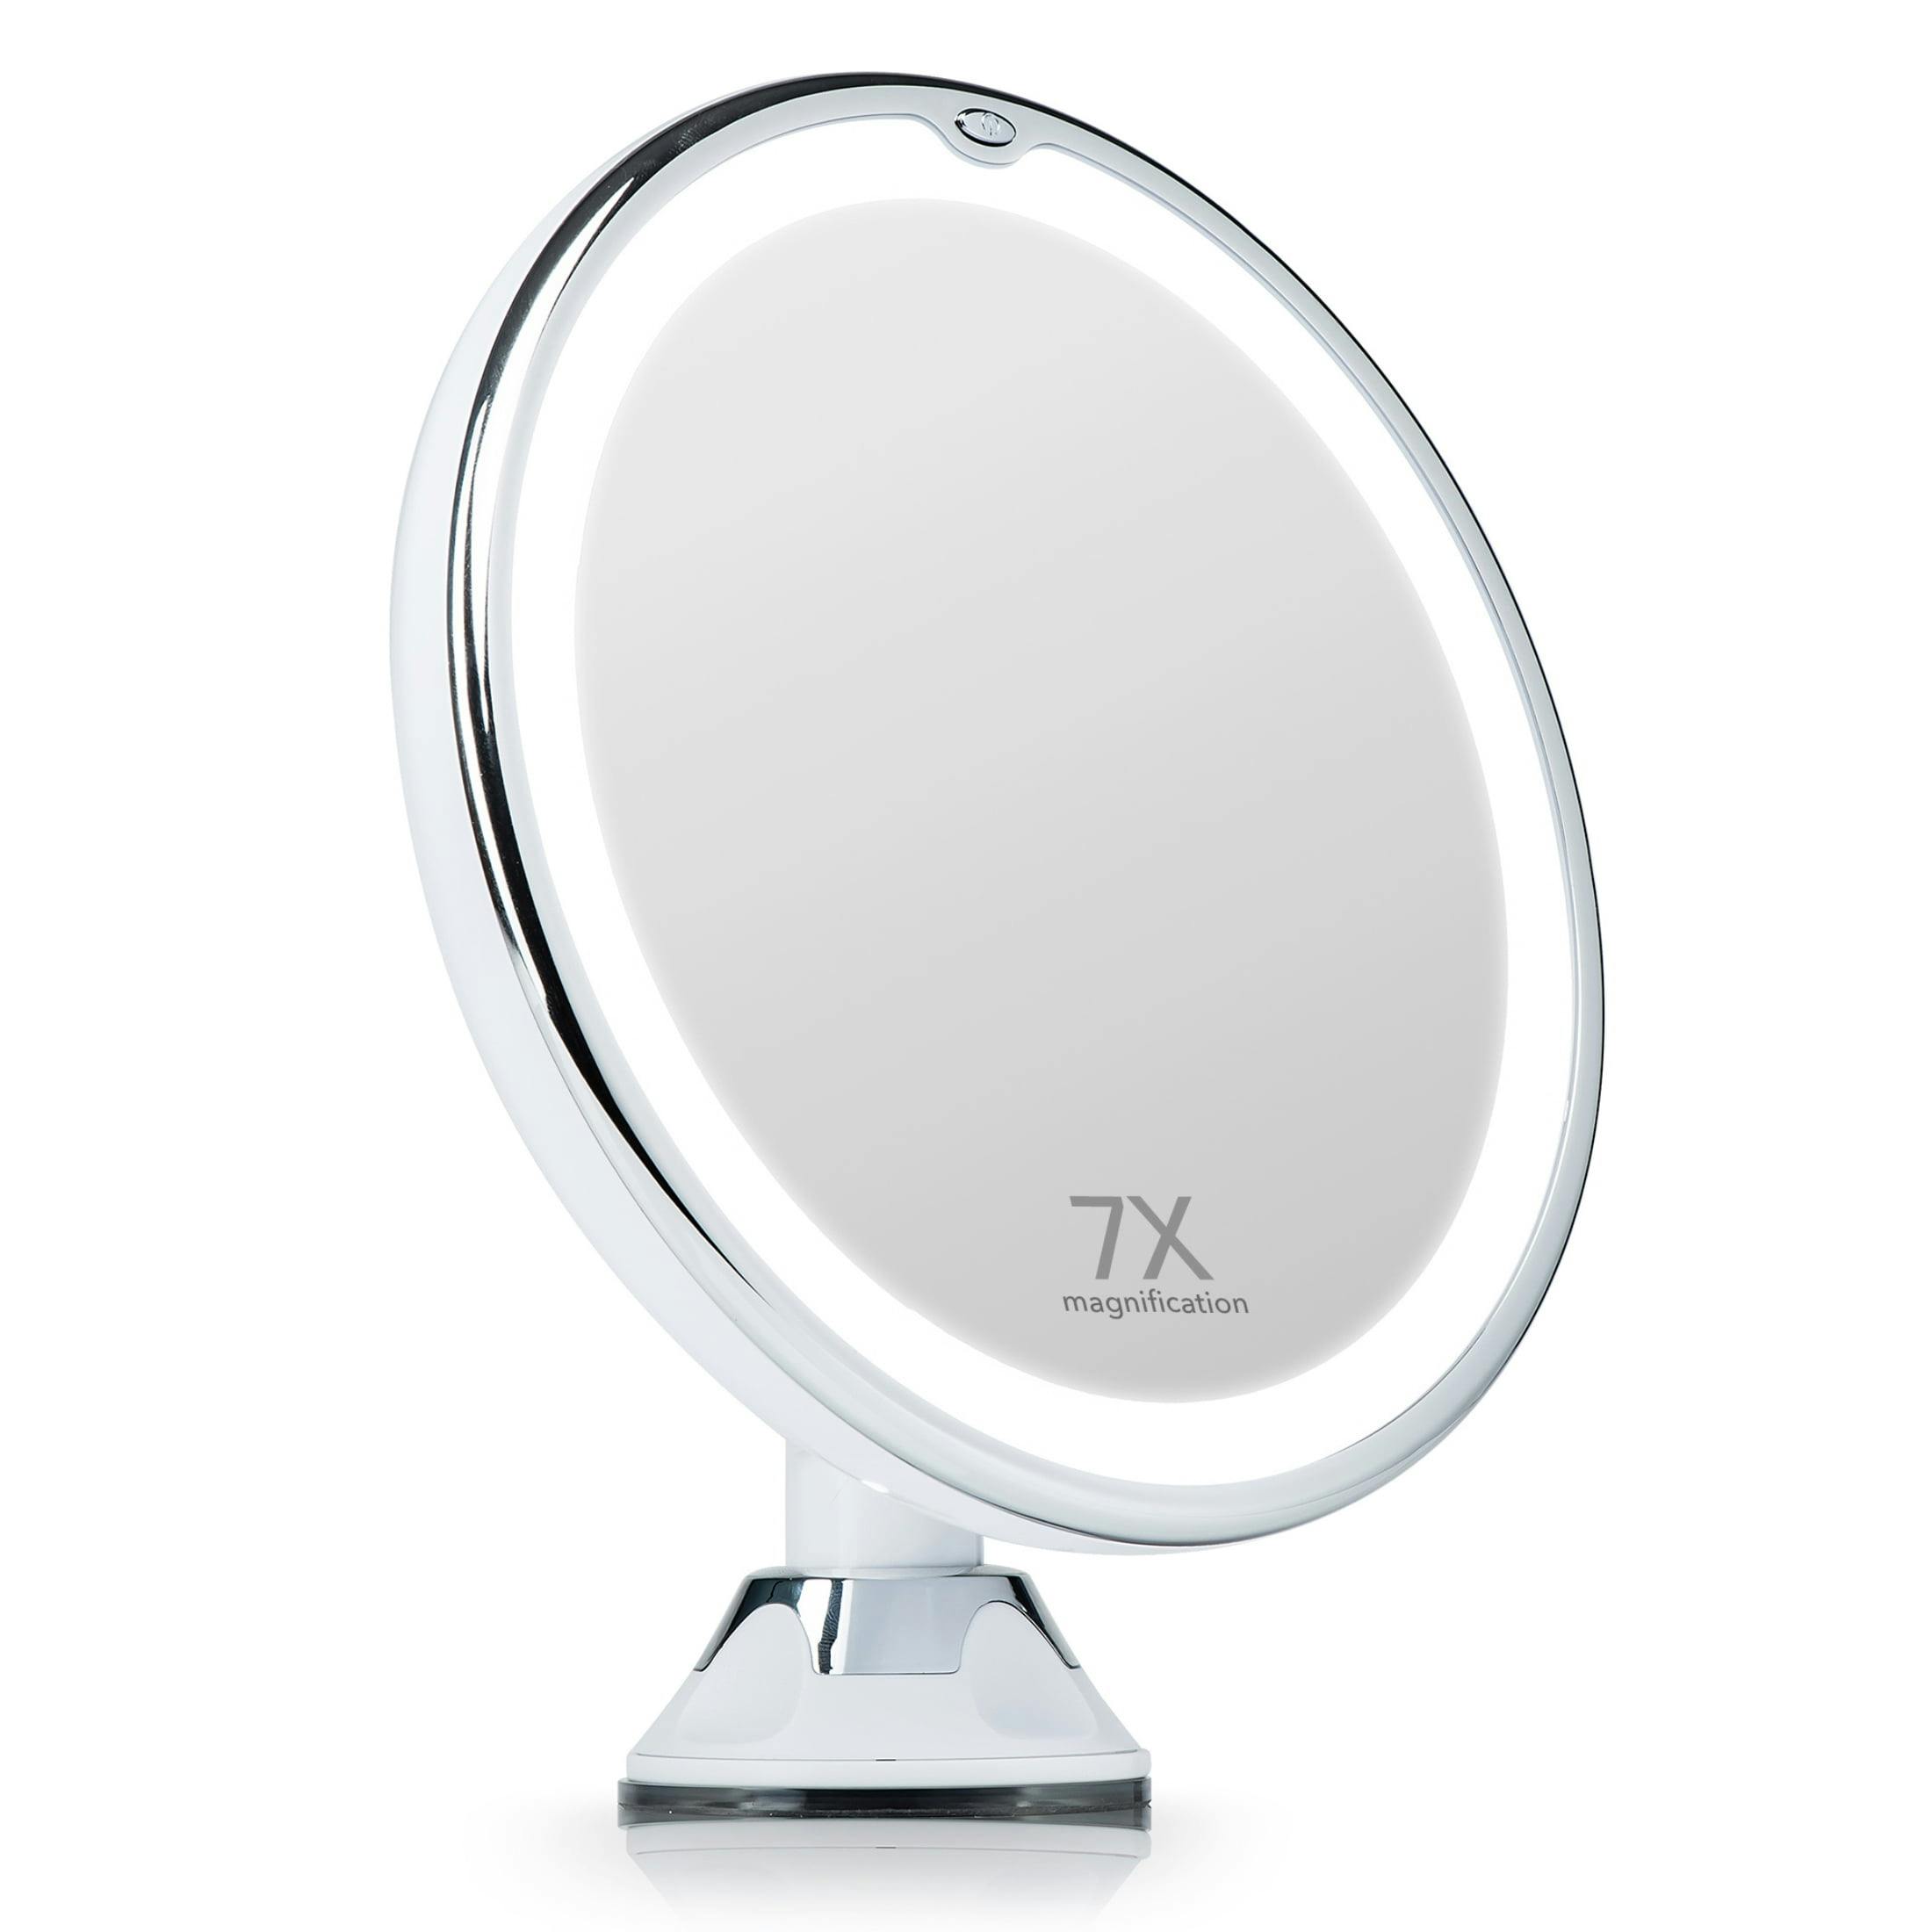 Luxe Chrome 7X Magnifying LED Wall Mounted Makeup Mirror